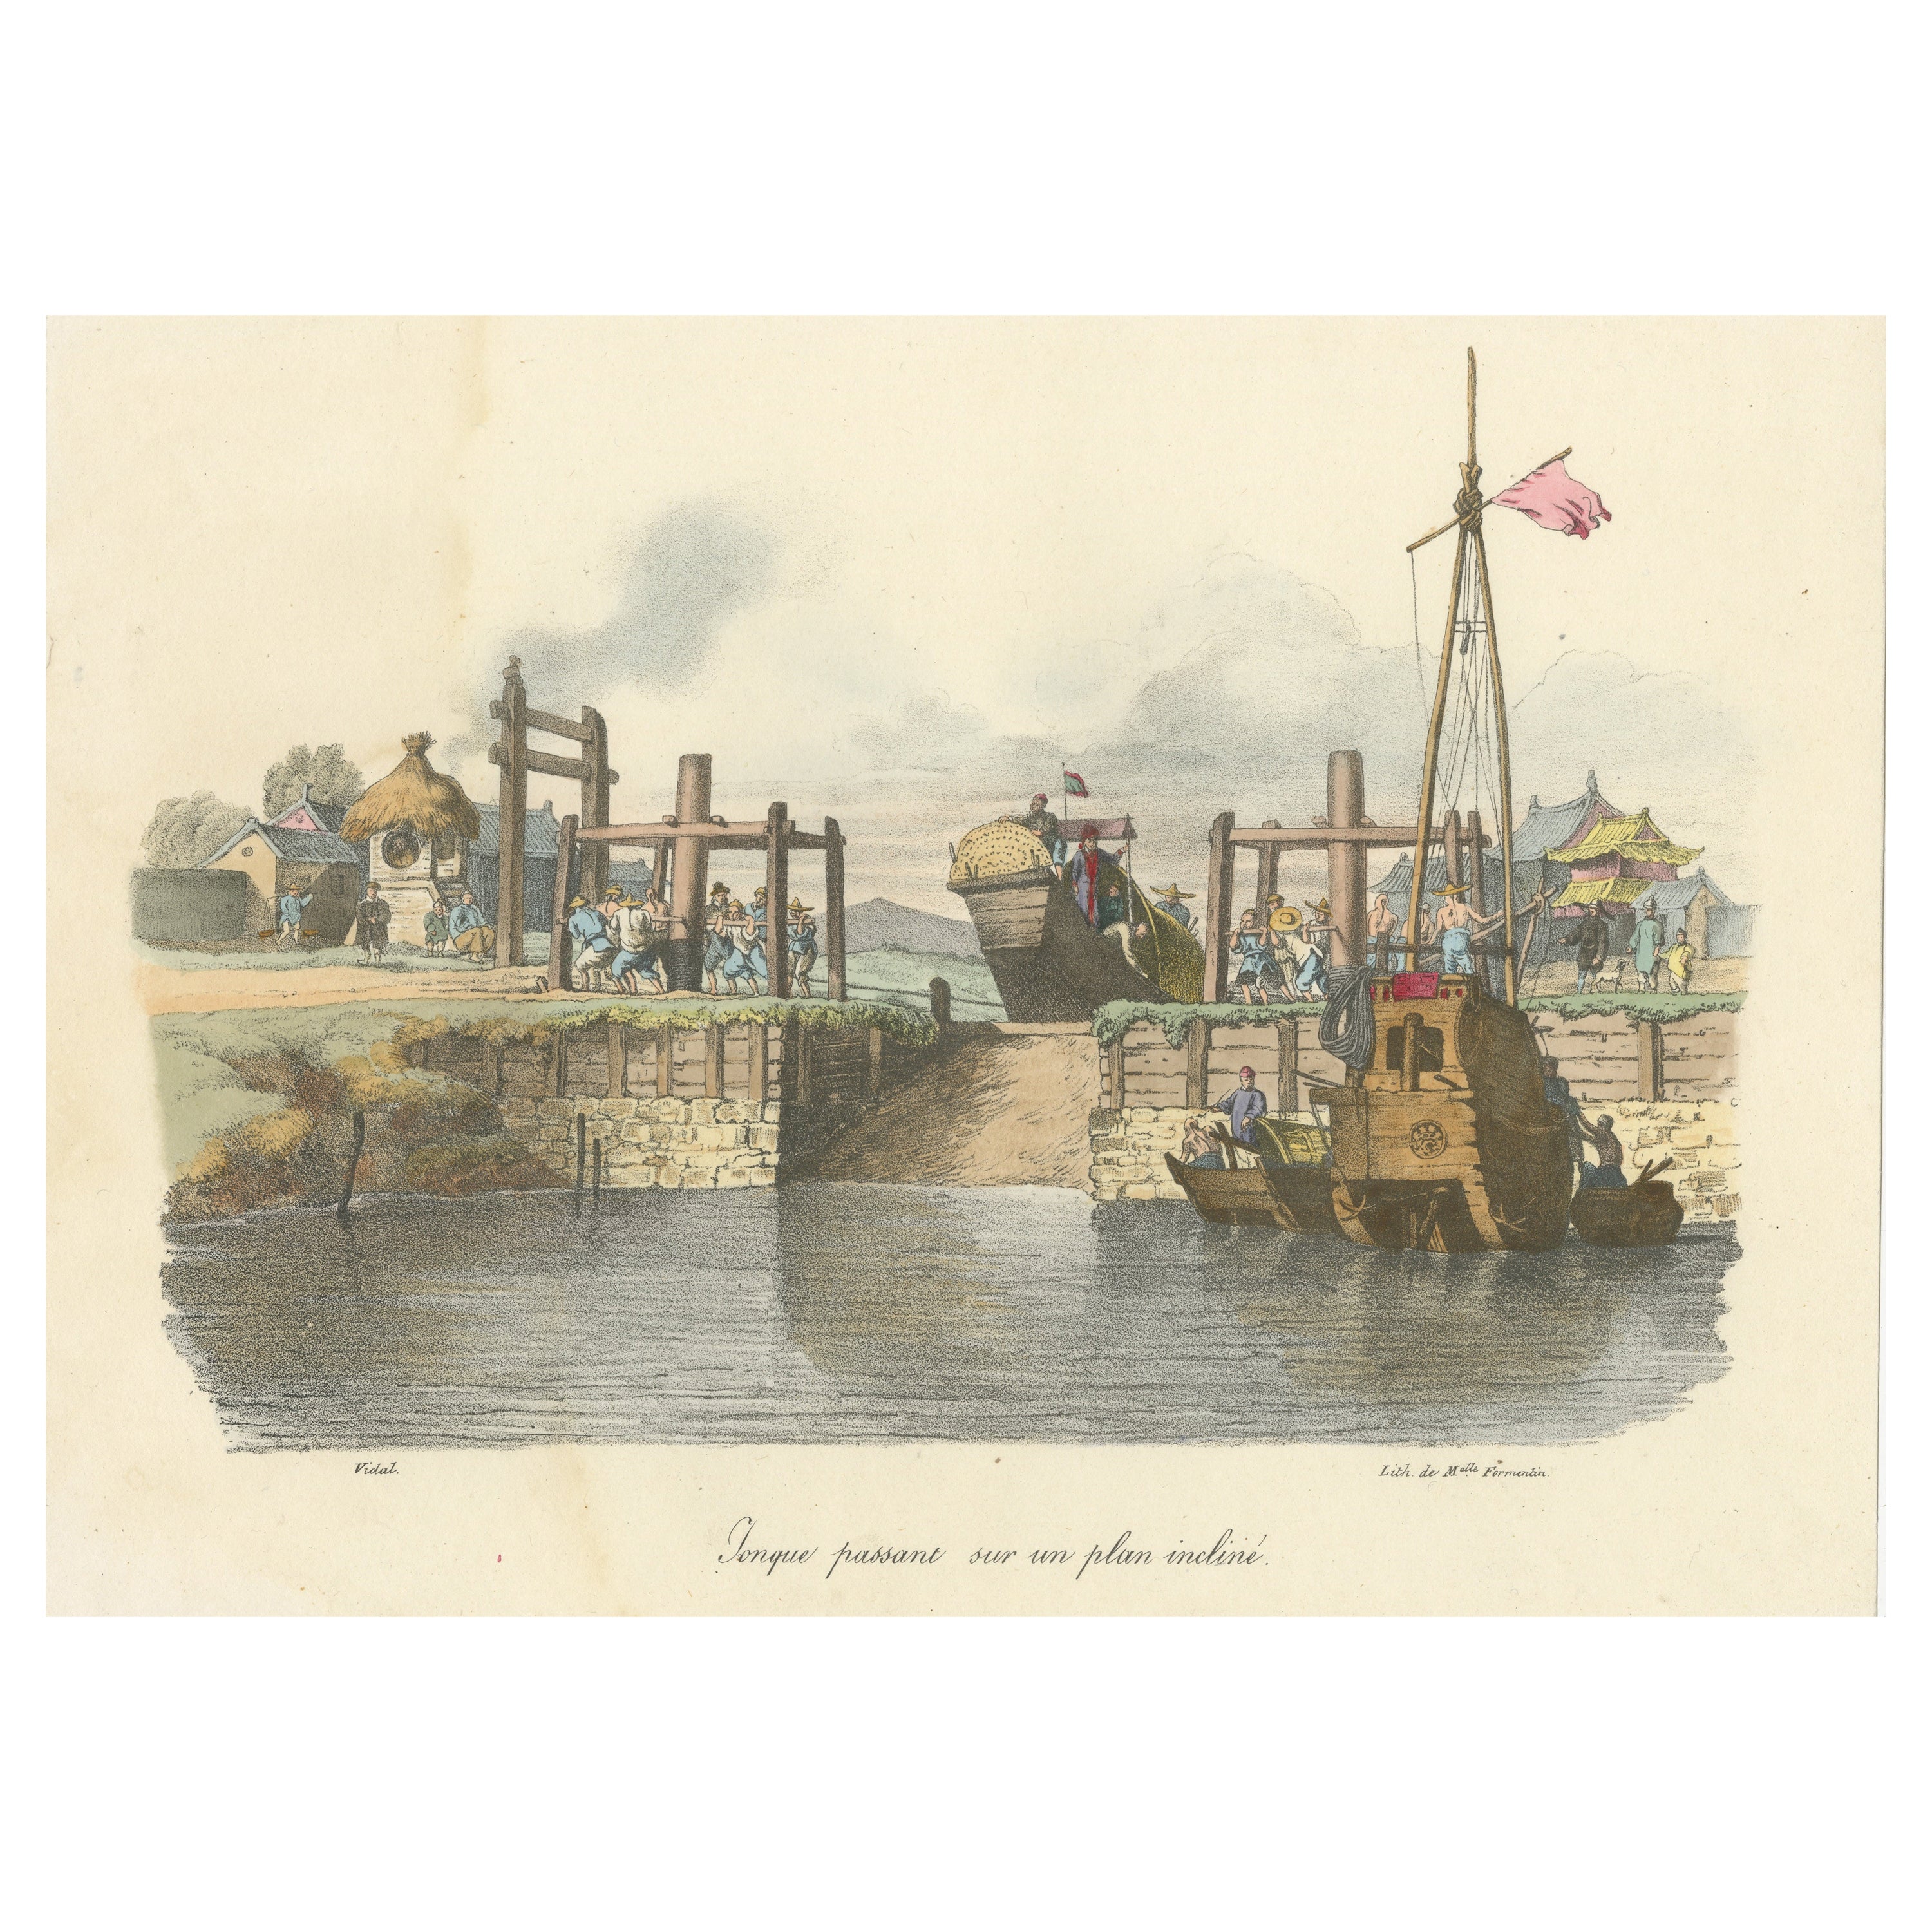 Antique Print of a Chinese Junk on a Slope